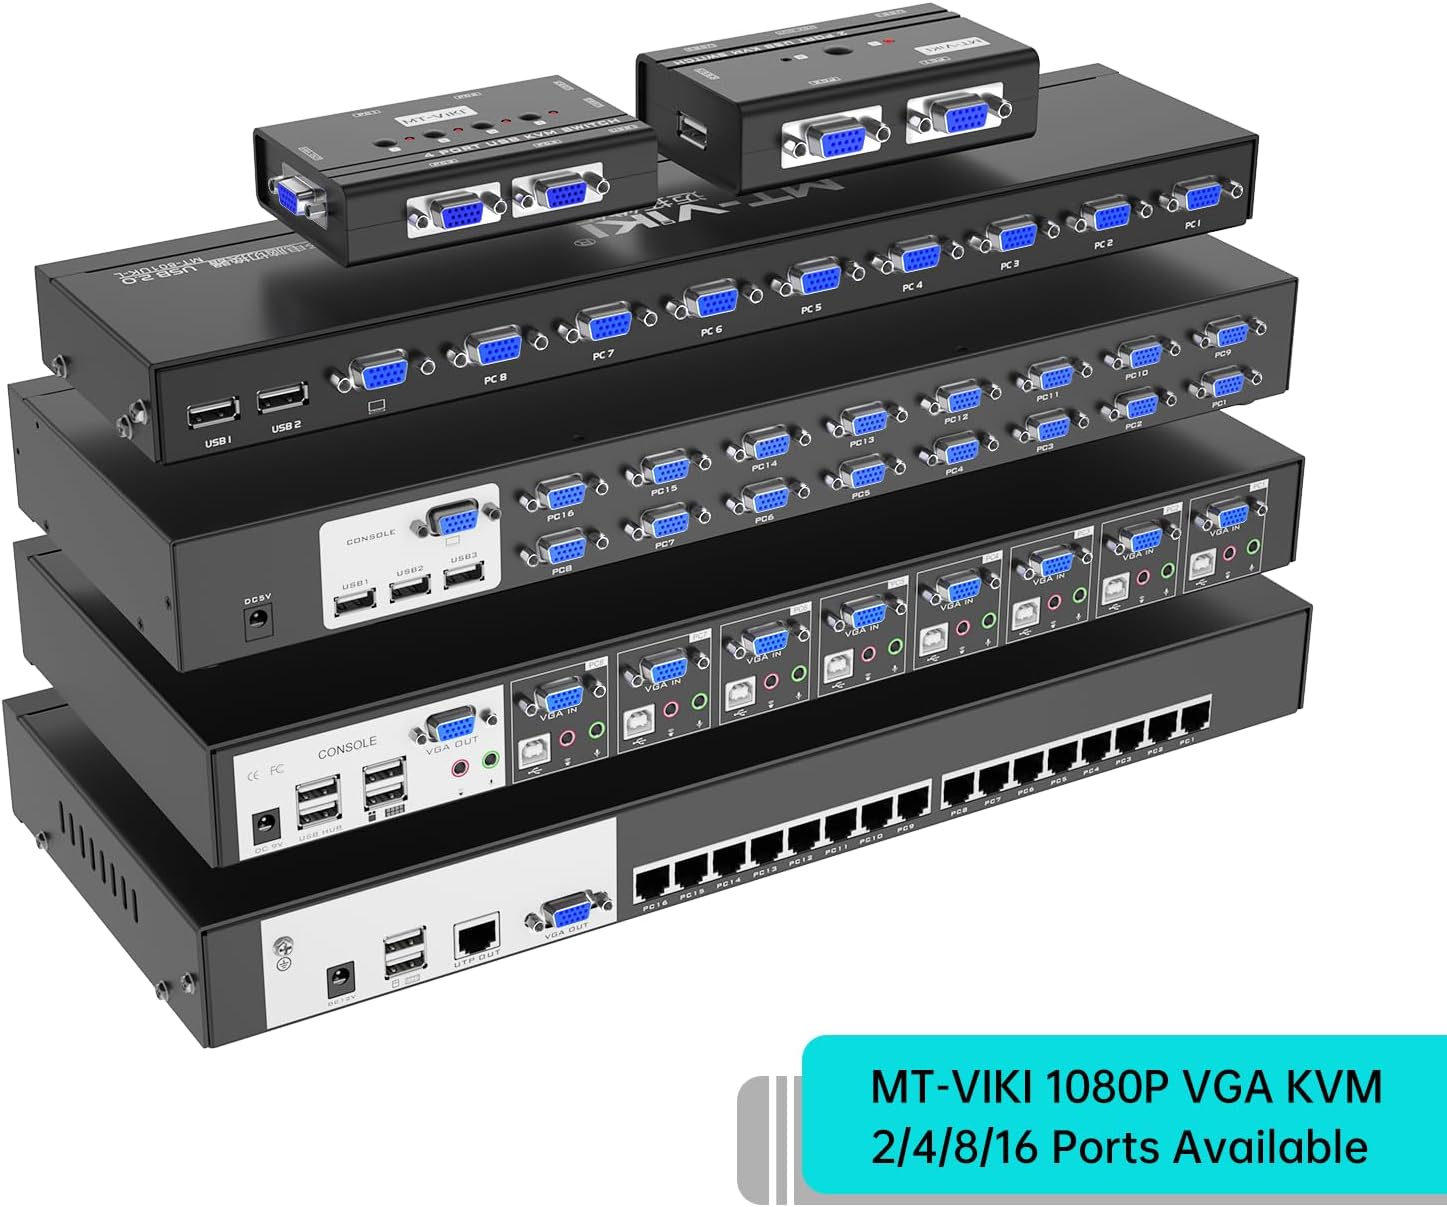 MT-VIKI 4 Port KVM Switch with included cables and USB hubs